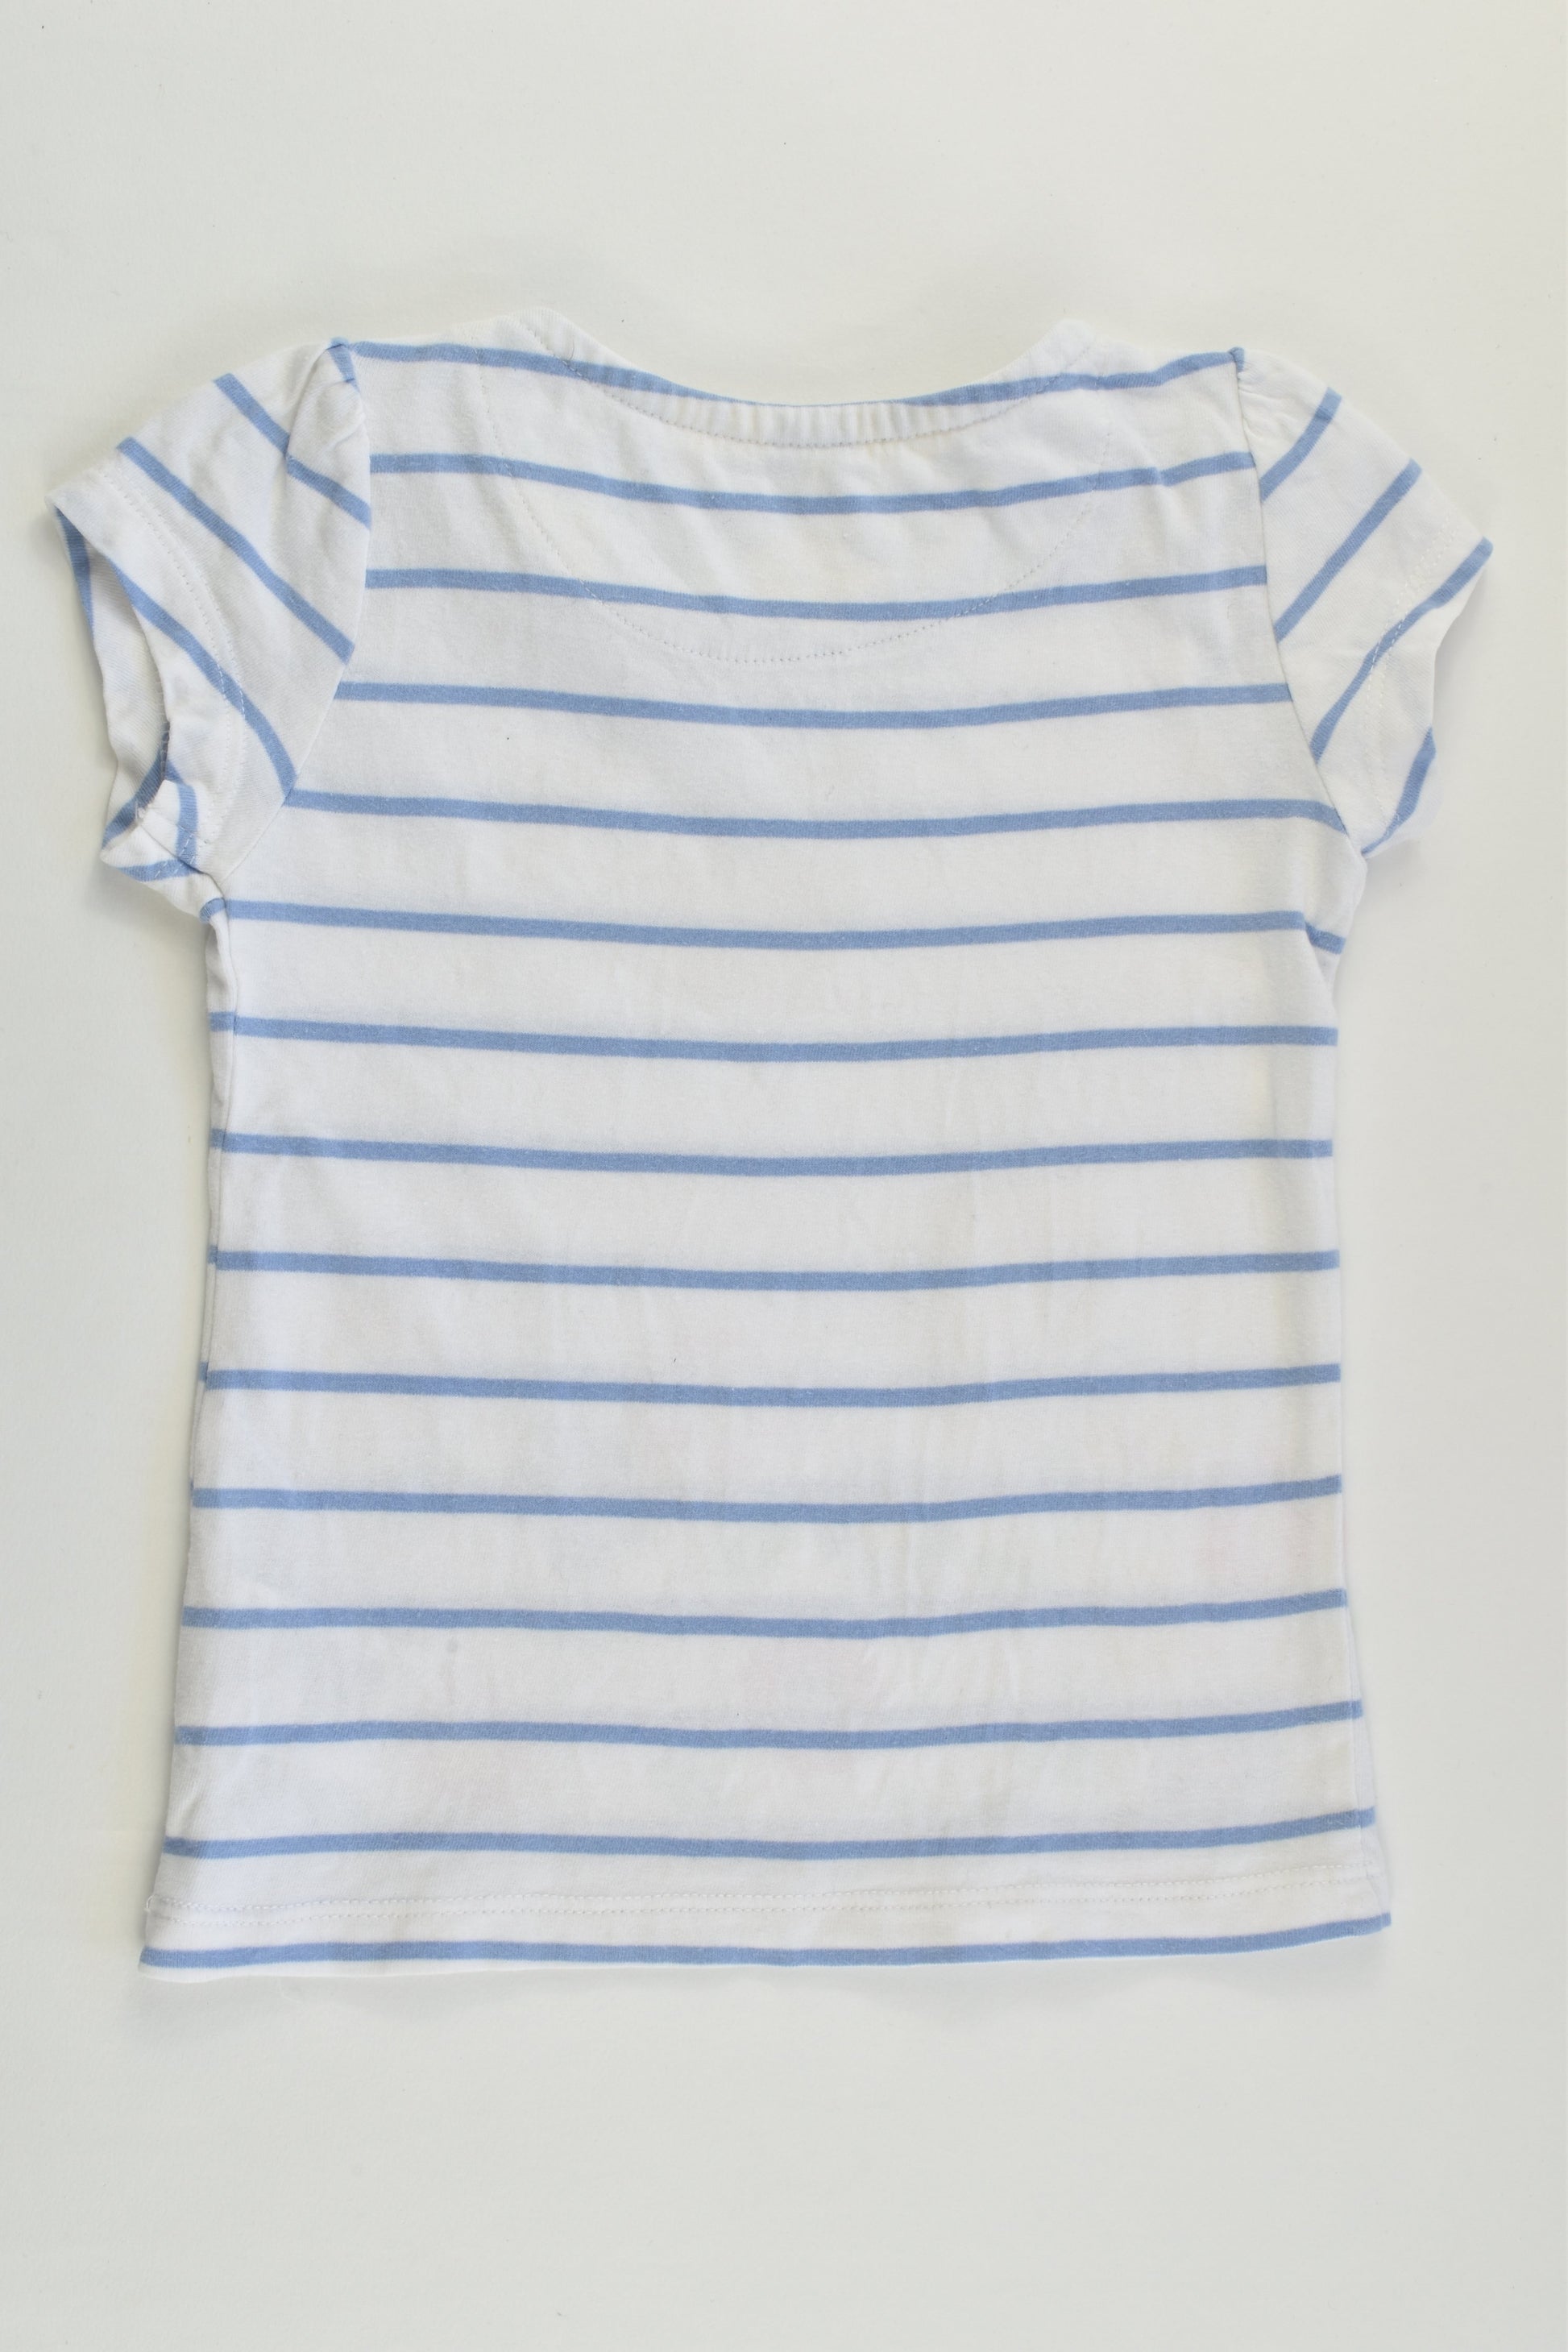 Mothercare Size 1 (12-18 months) Stripes and Flowers T-shirt